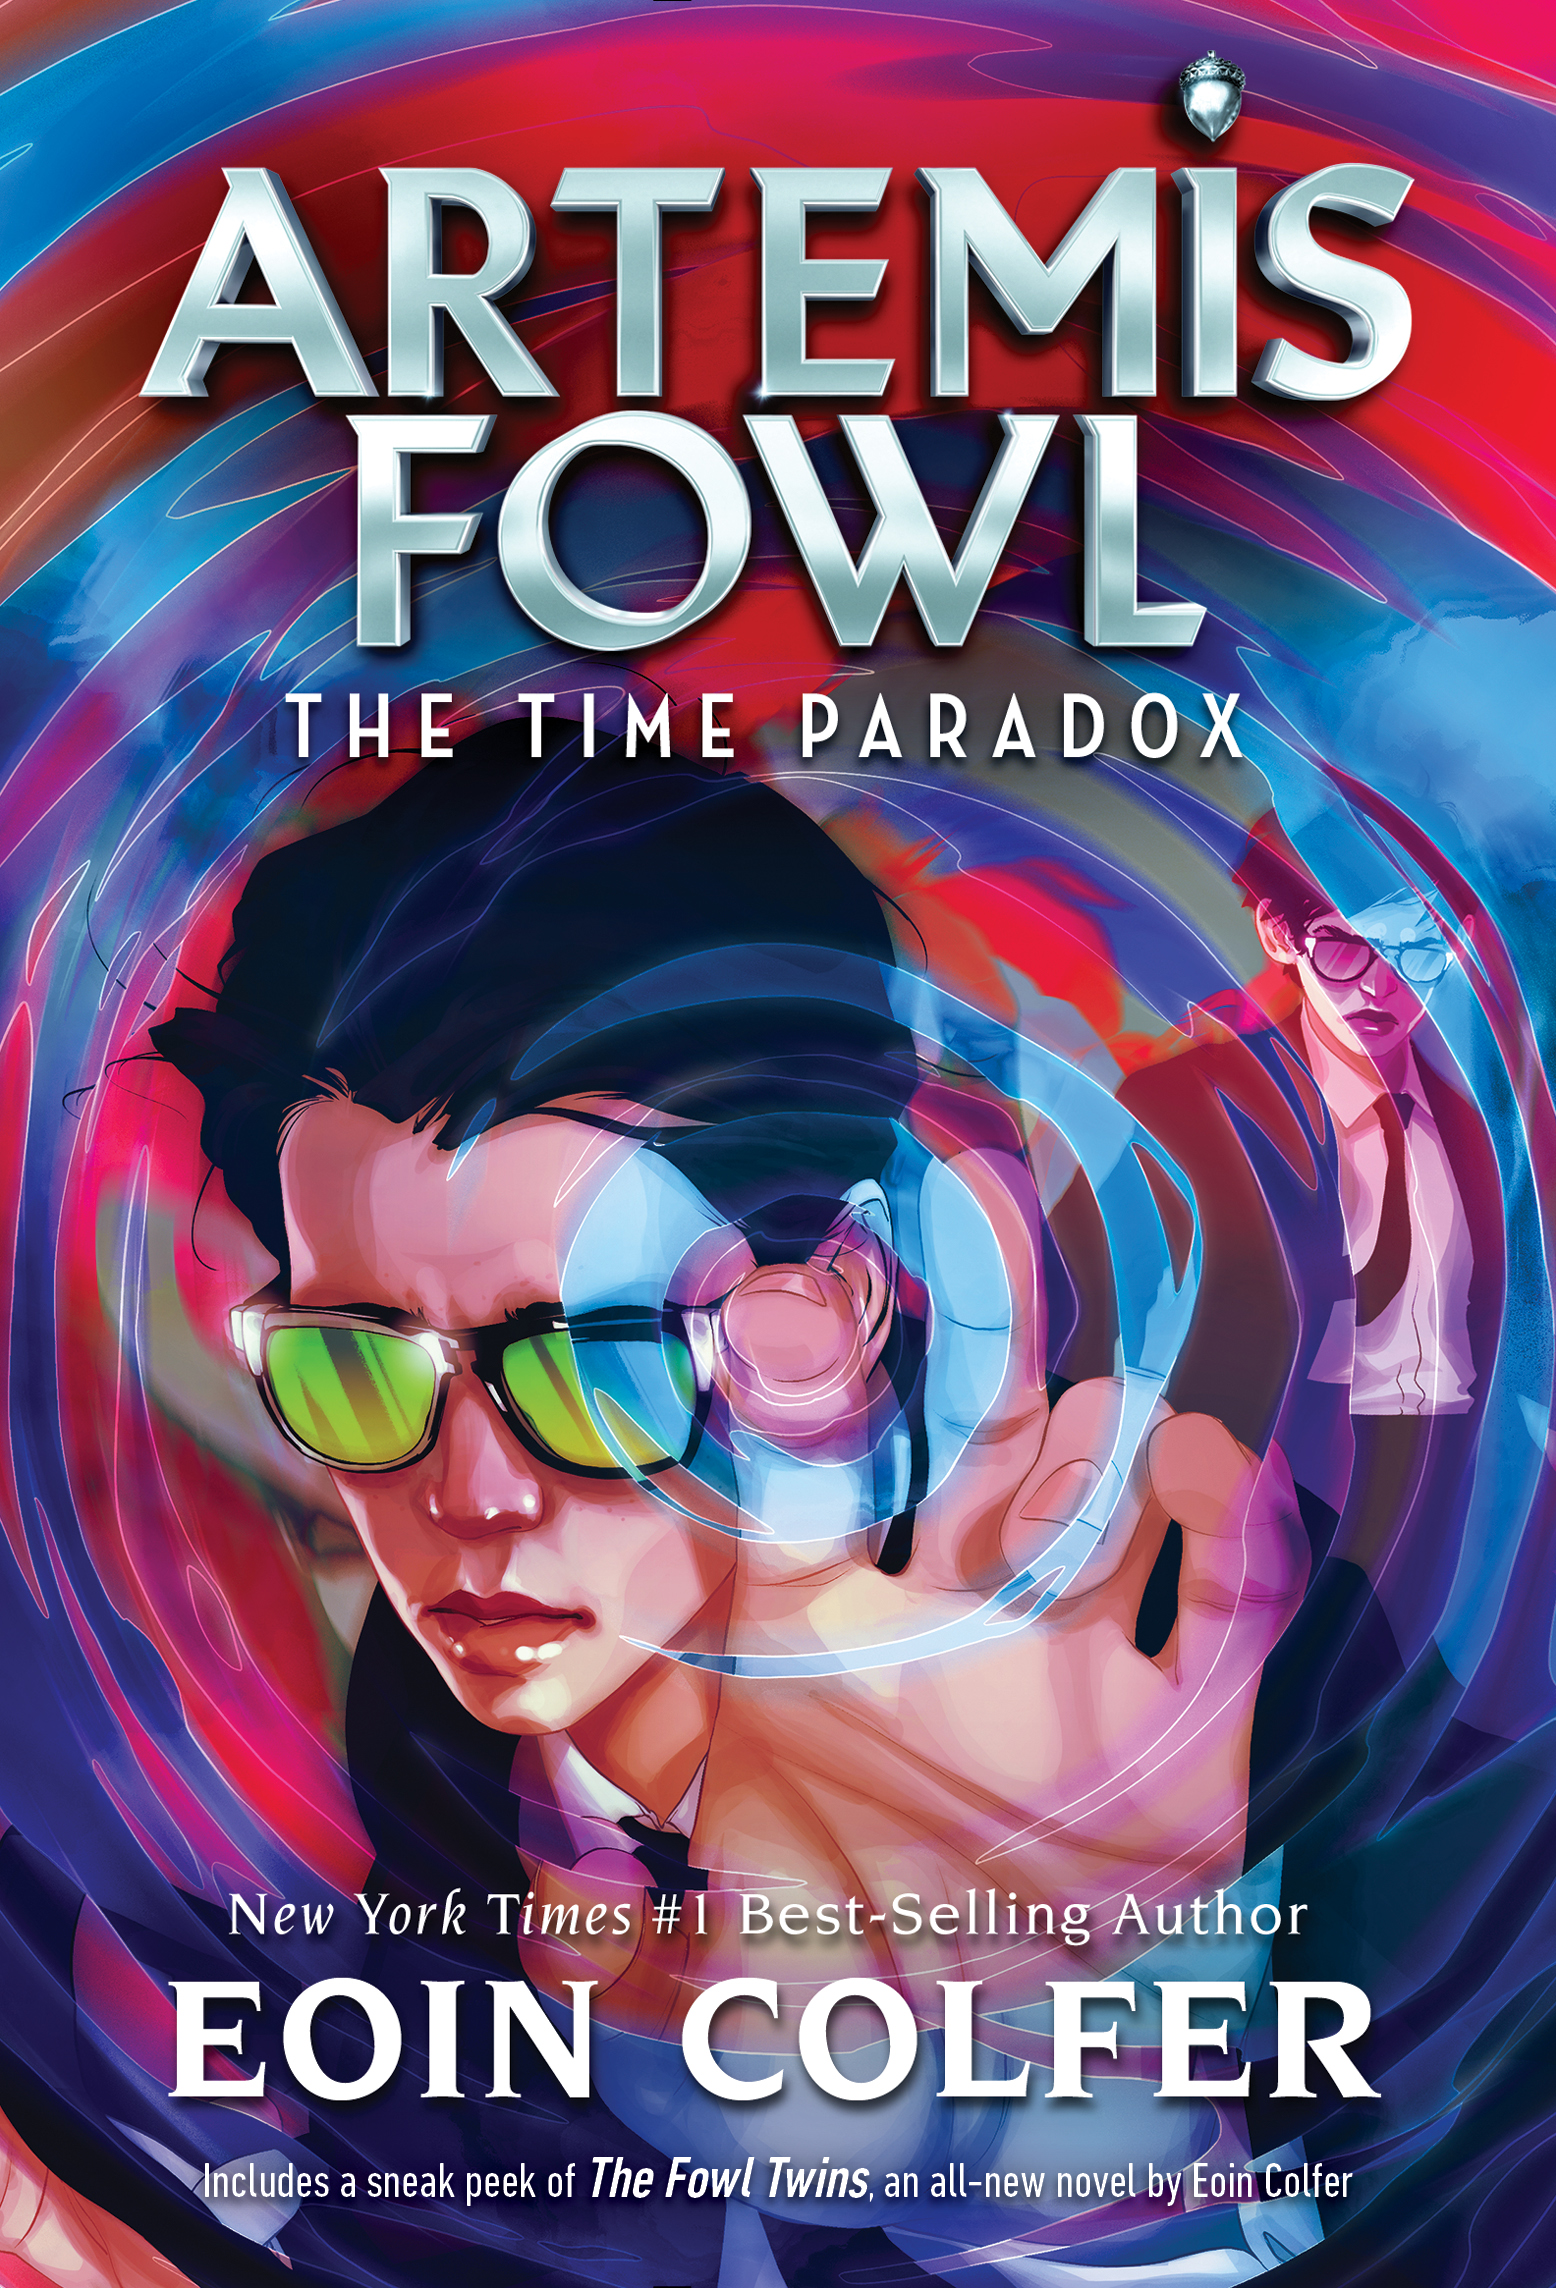 ARTEMIS FOWL by COLFER EOIN